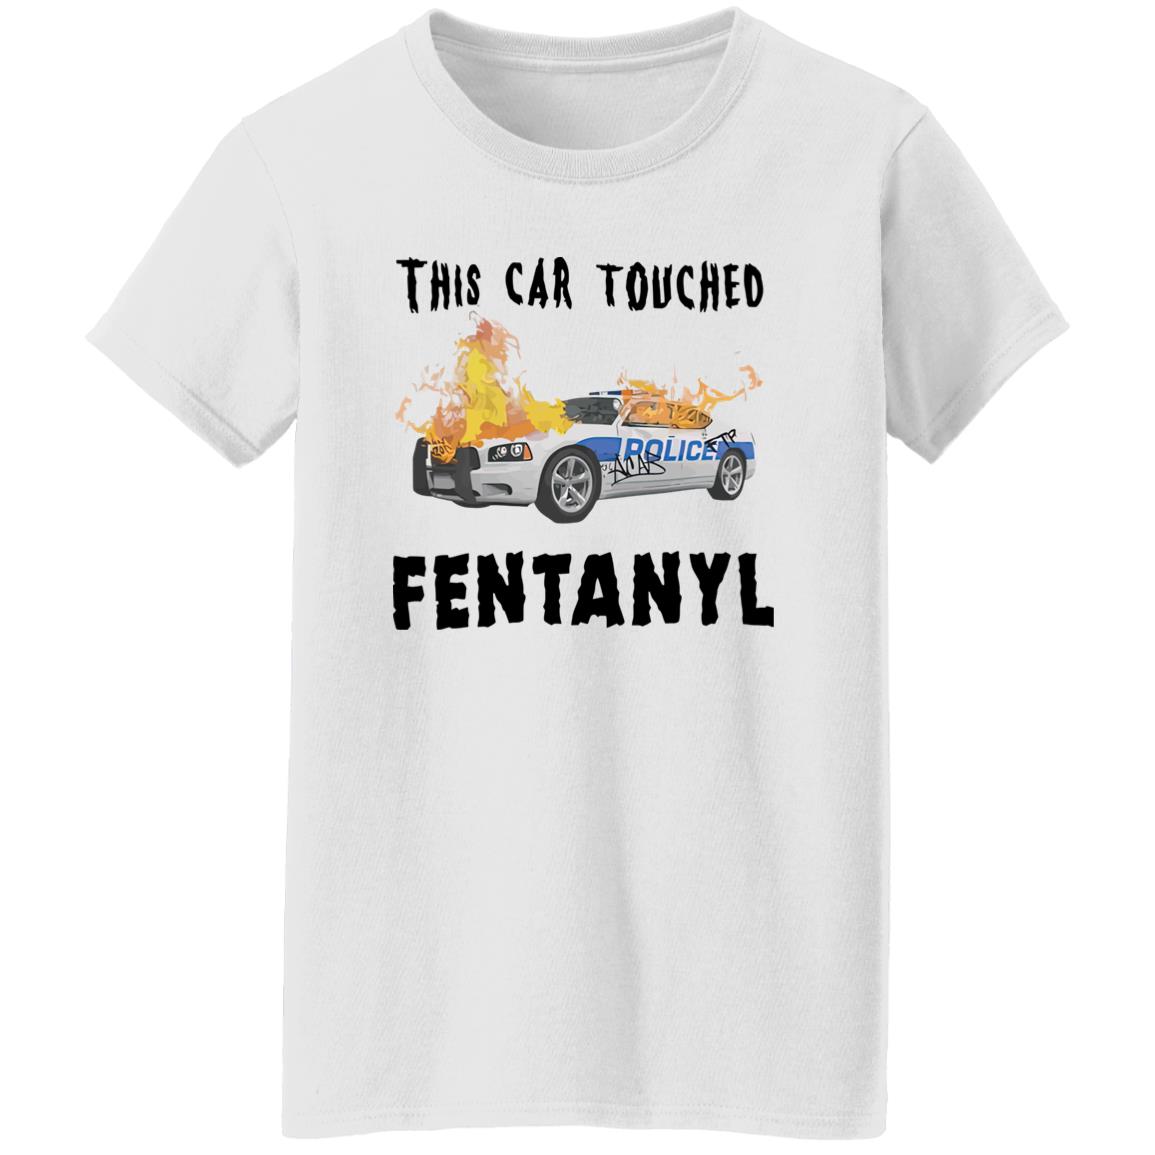 This Car Touched Fentanyl T-Shirt